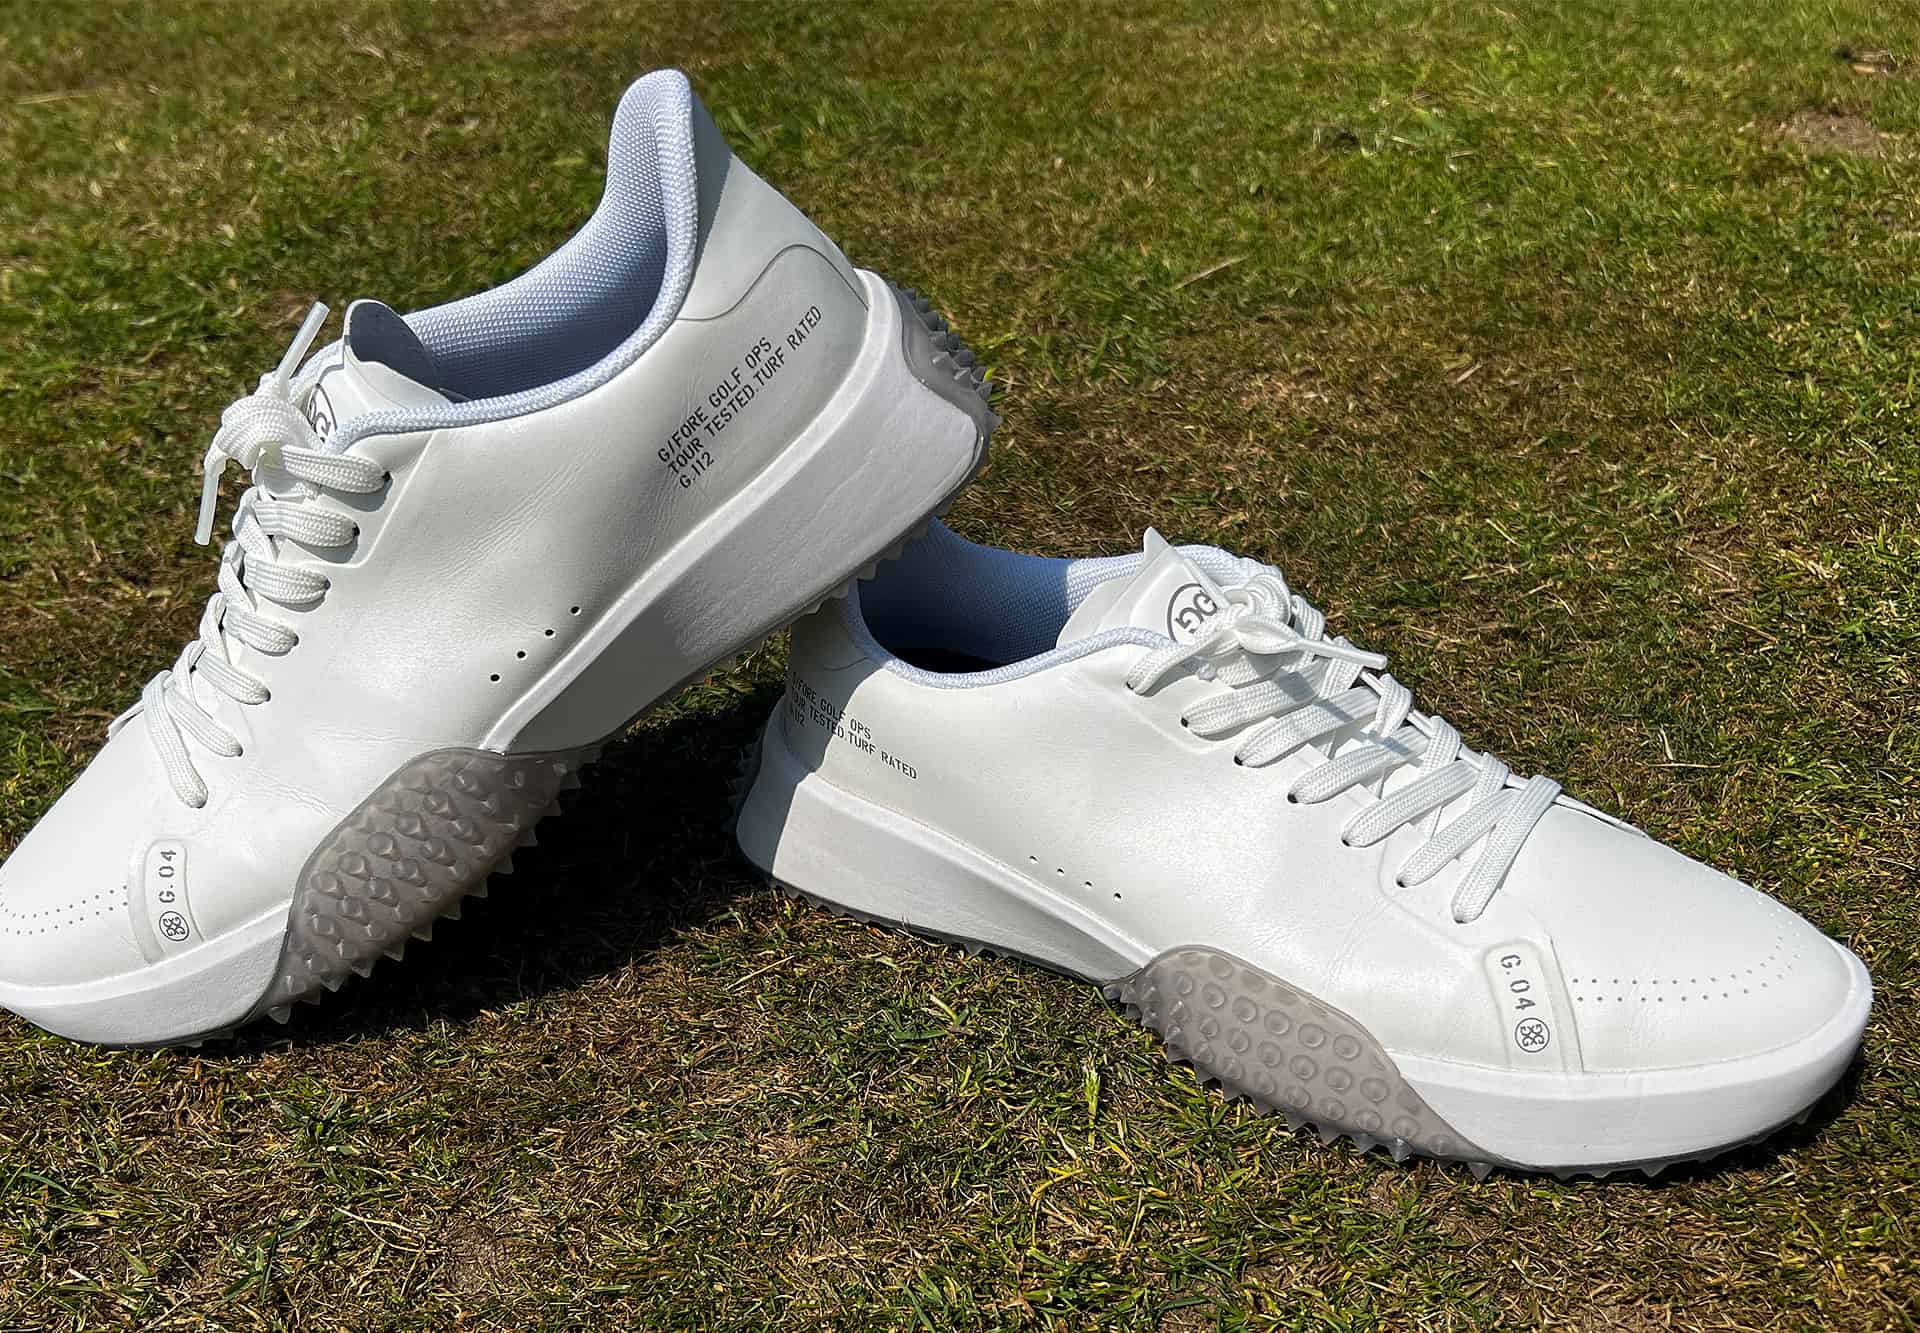 G/Fore G.112 Golf Shoe Review - National Club Golfer